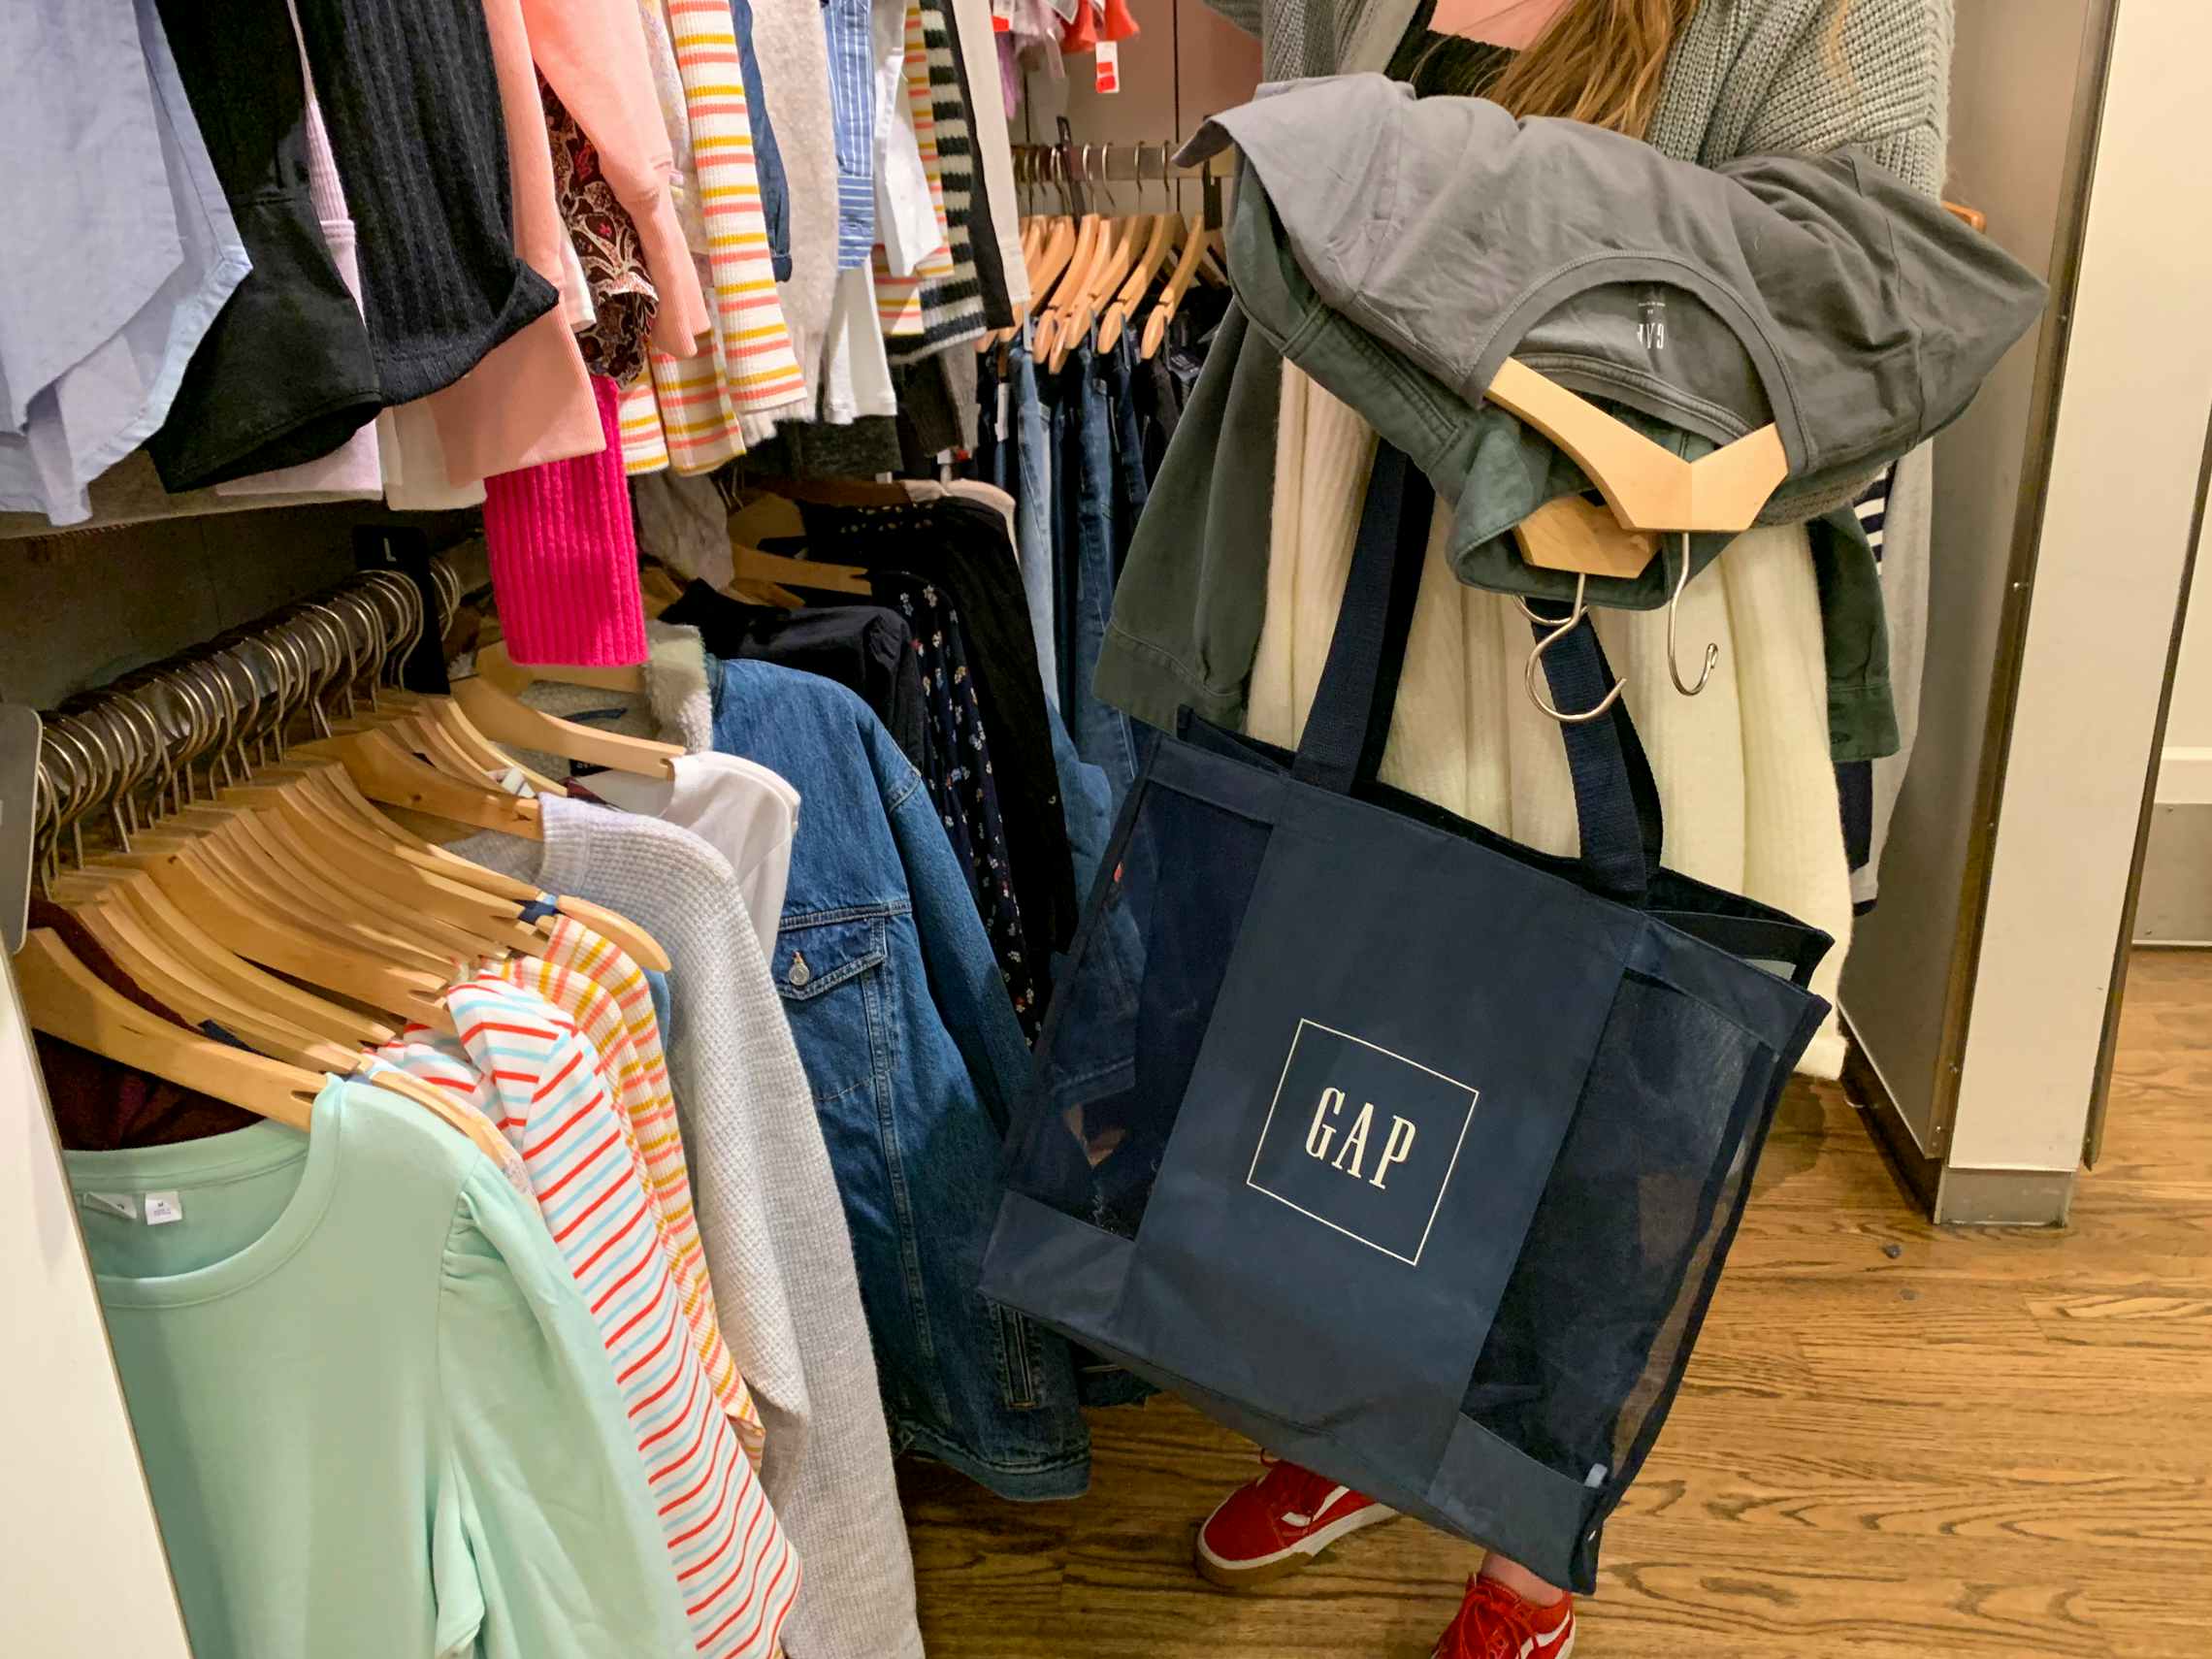 A woman shopping searching a clearance rack with clothing in her arms.